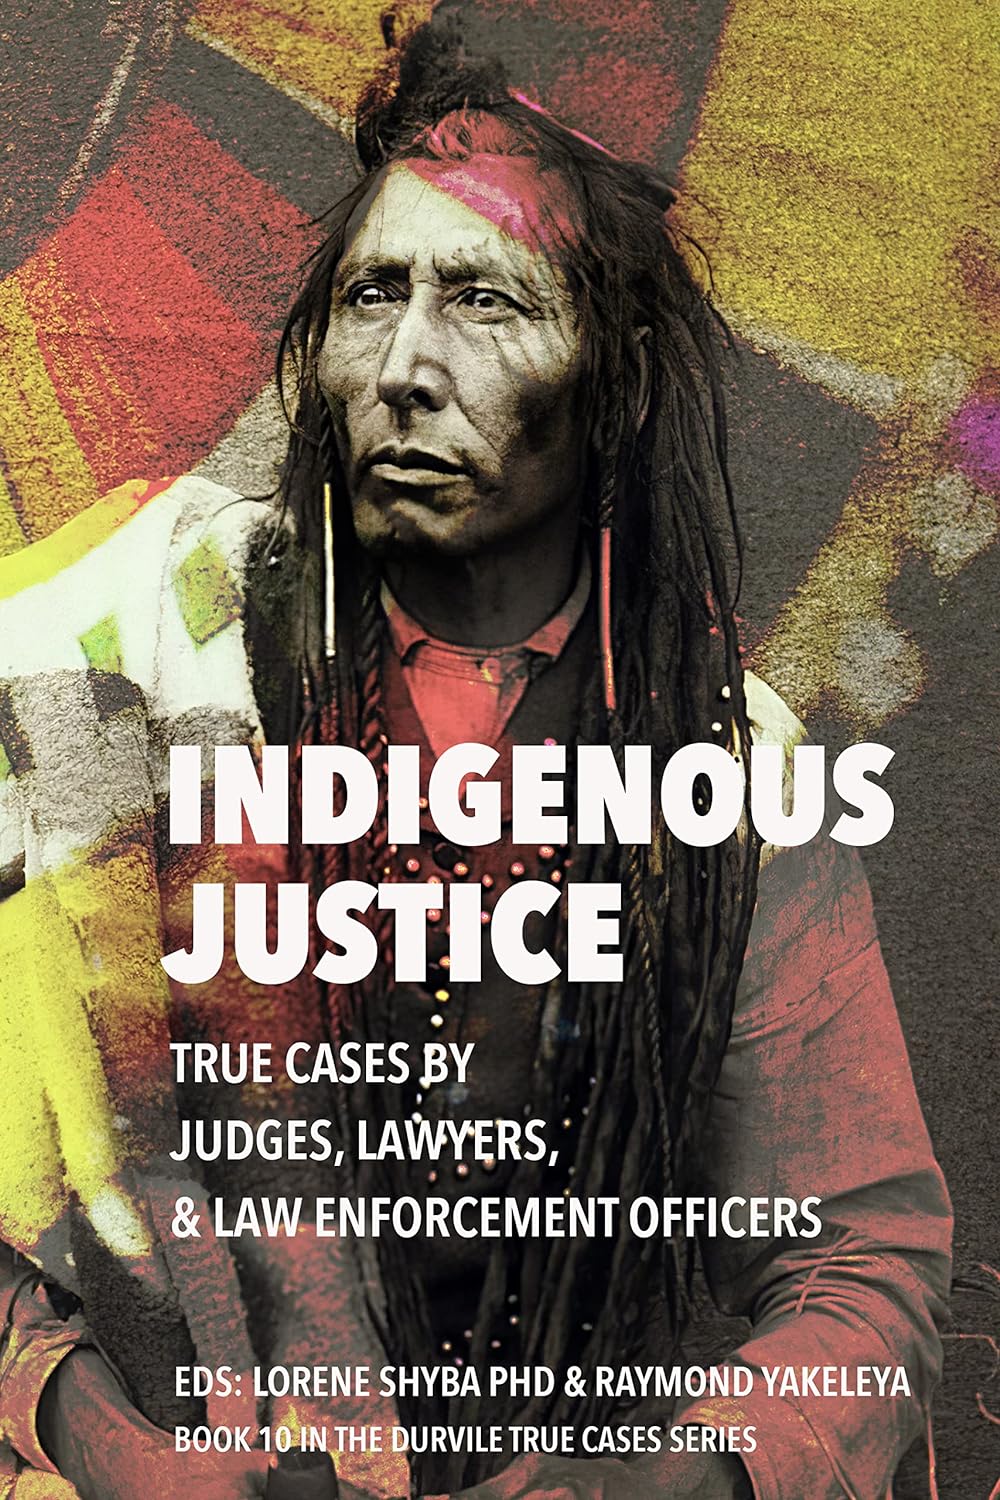 Indigenous Justice: True Cases by Judges, Lawyers, & Law Enforcement Officers edited by Lorene Shyba & Raymond Yakeleya